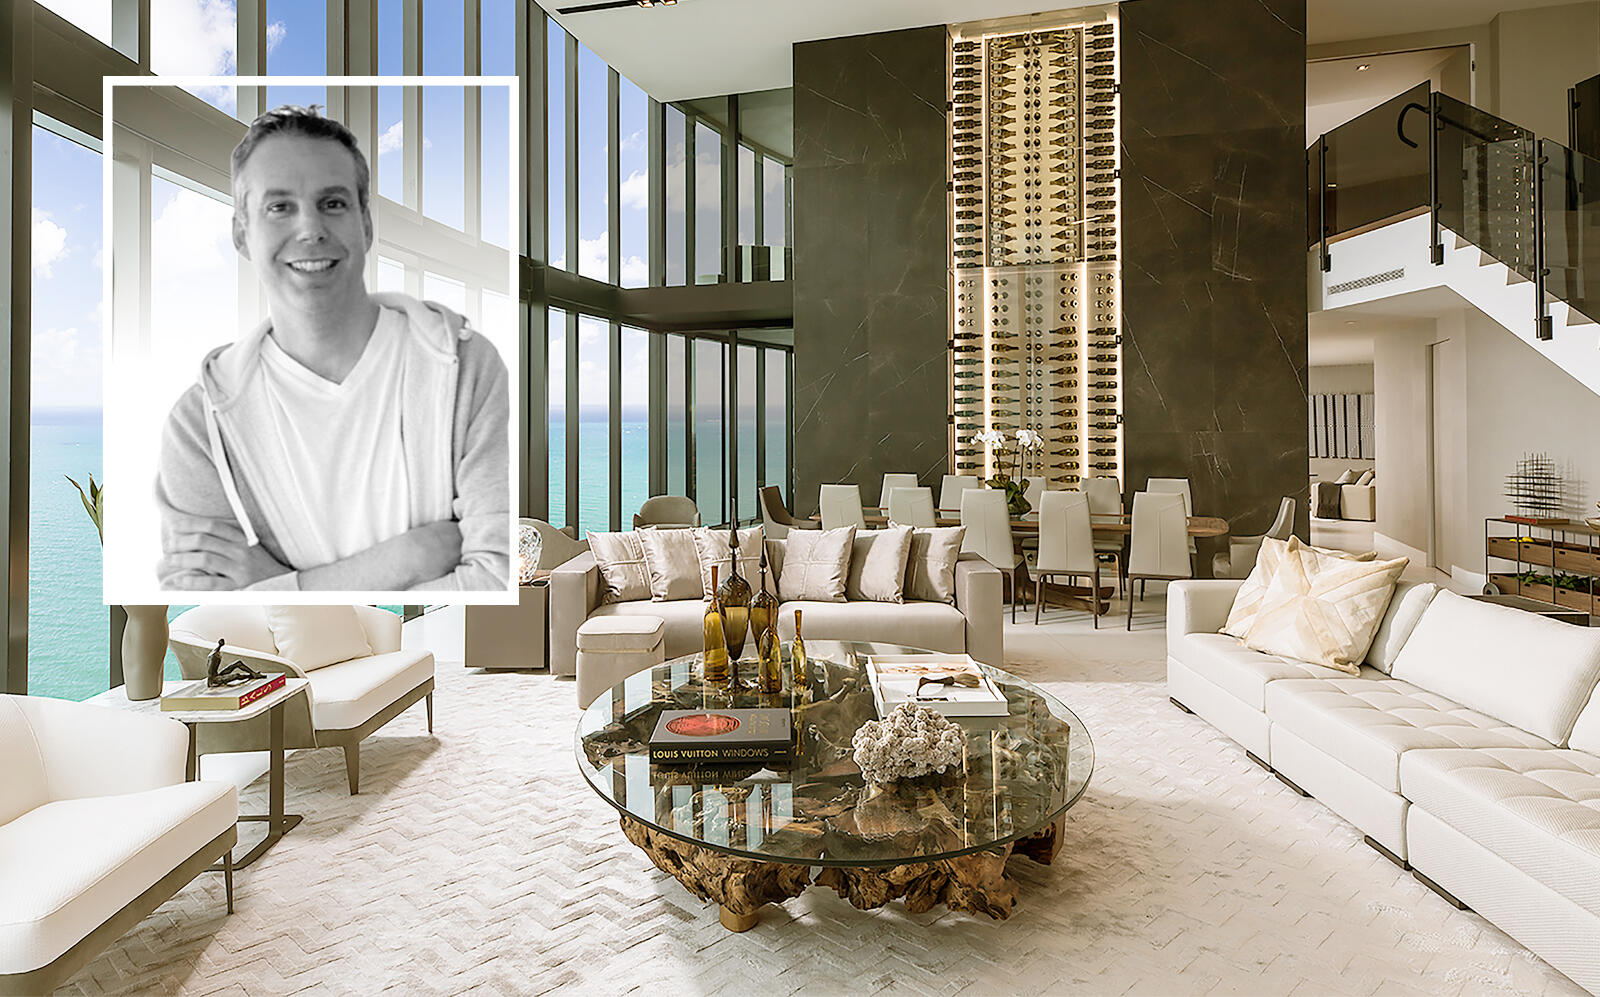 DLocal founder Andres Bzurovski with the Porsche Design Tower penthouse (DLocal)